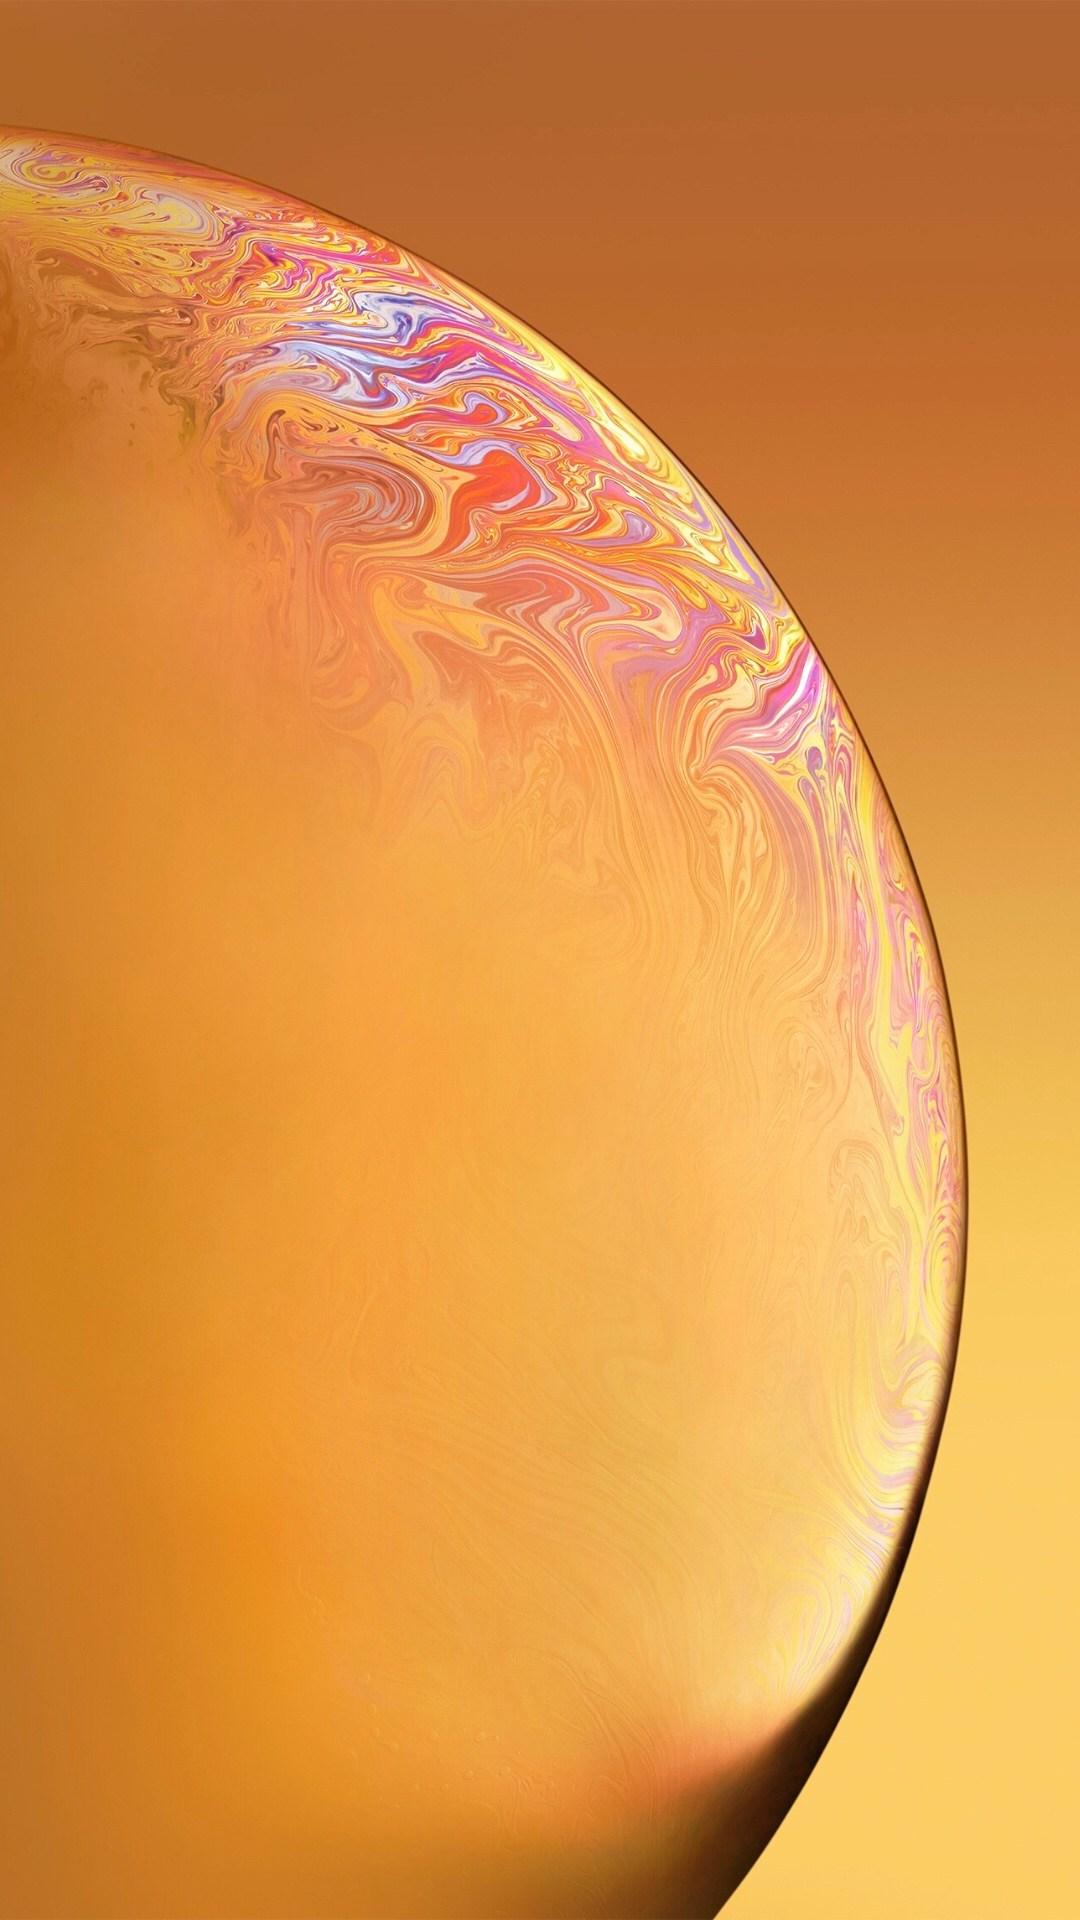 Exclusive: Download iPhone XR Wallpaper & other iPhone 2018